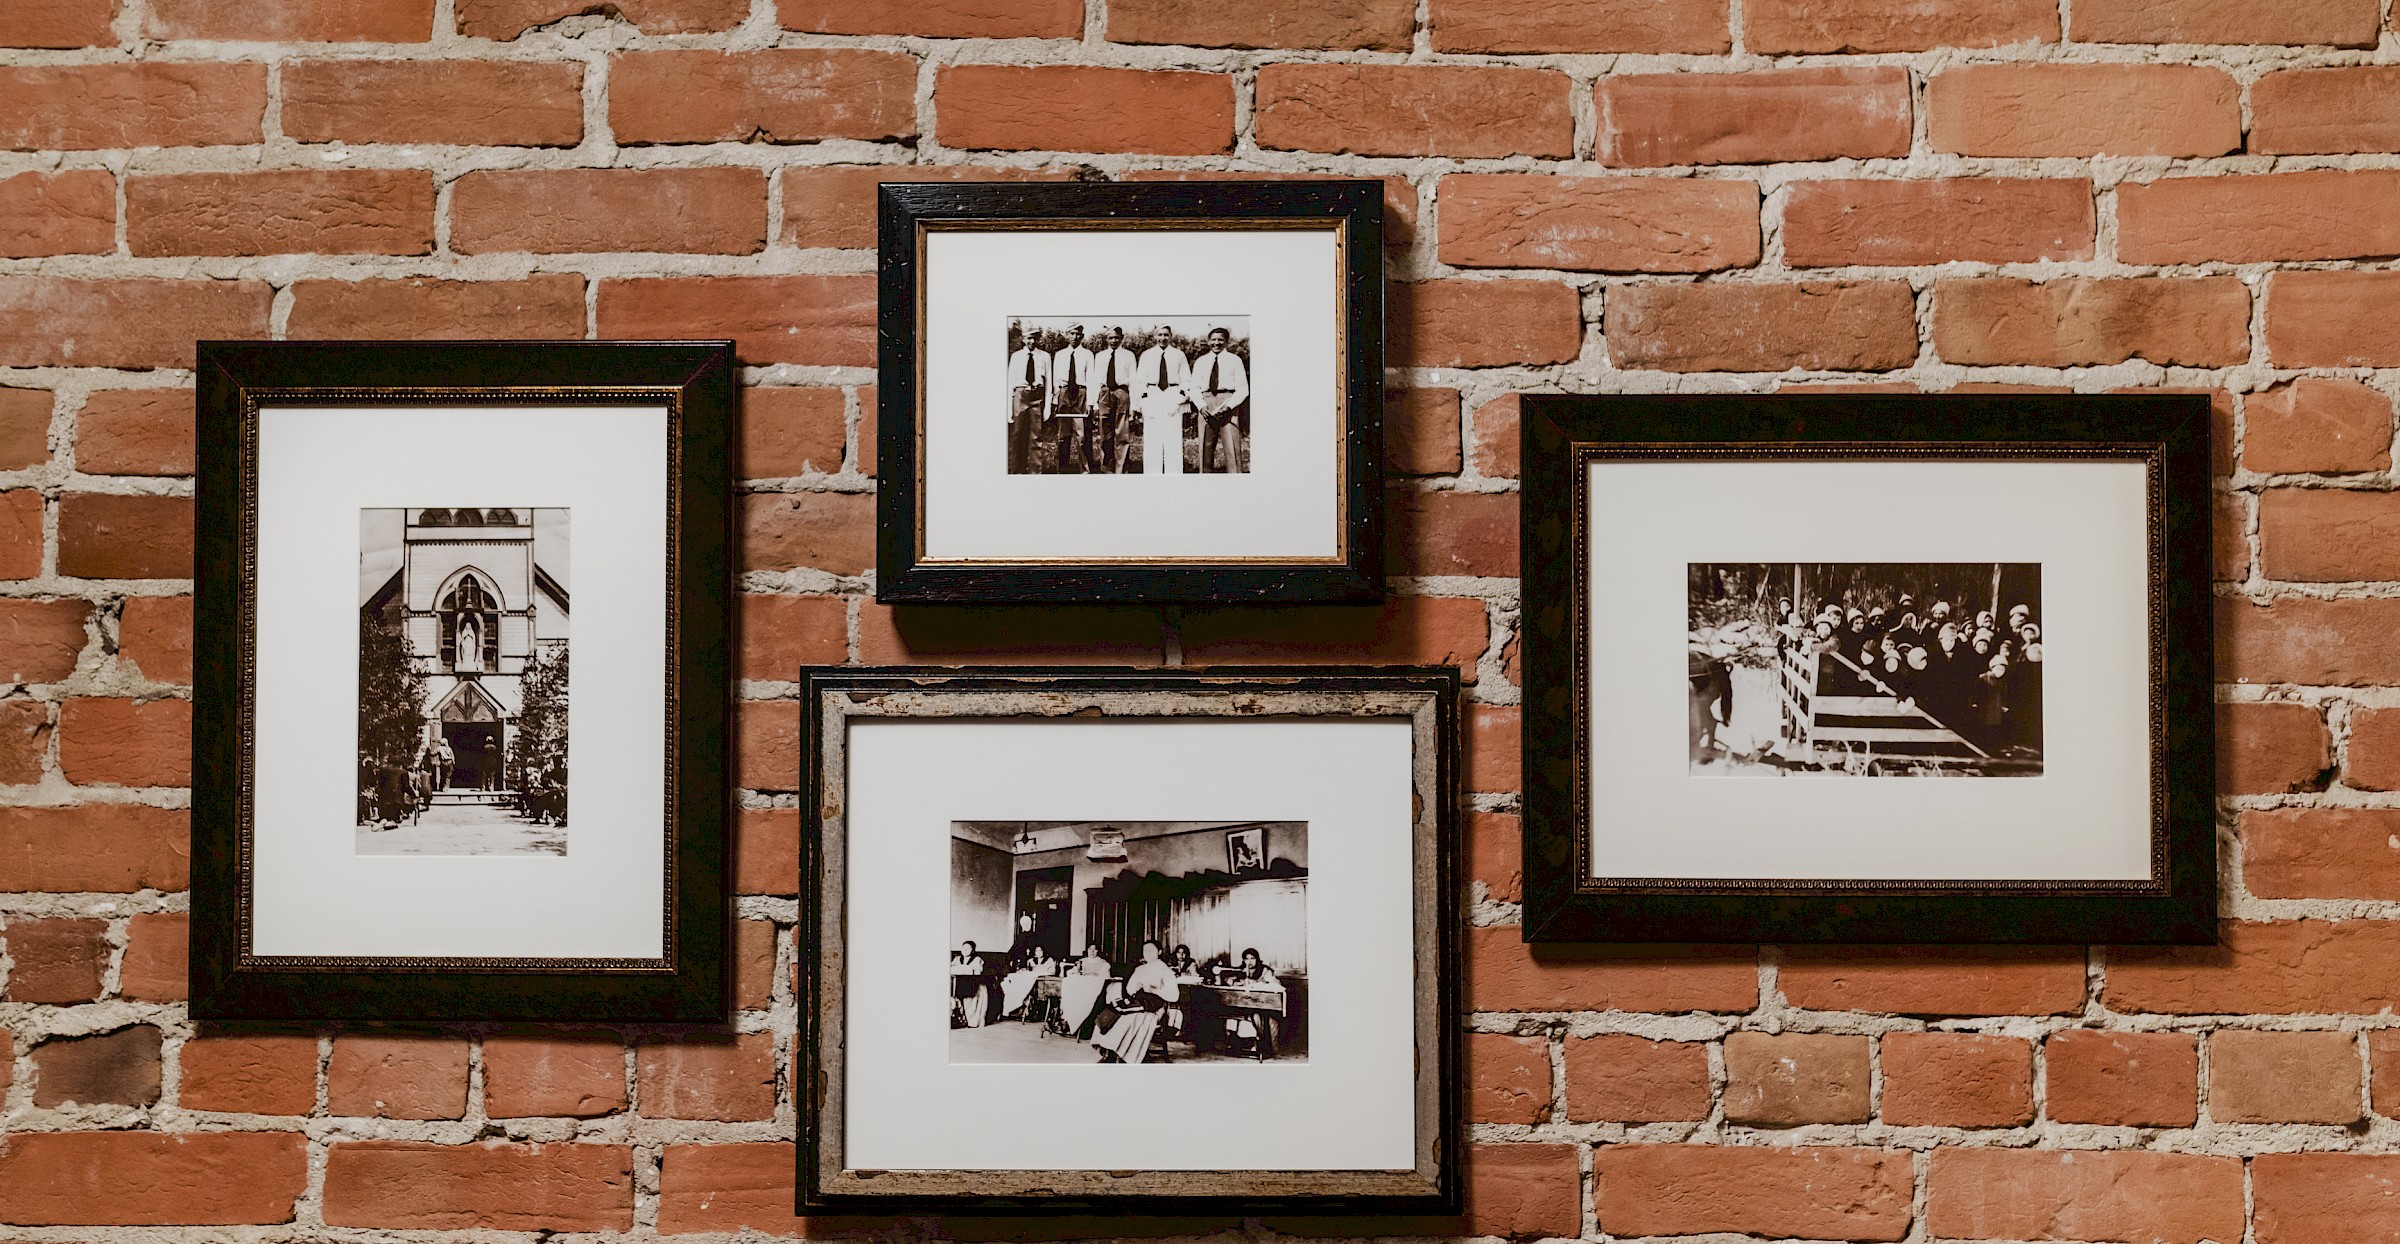 Historical photos in the Mission Building